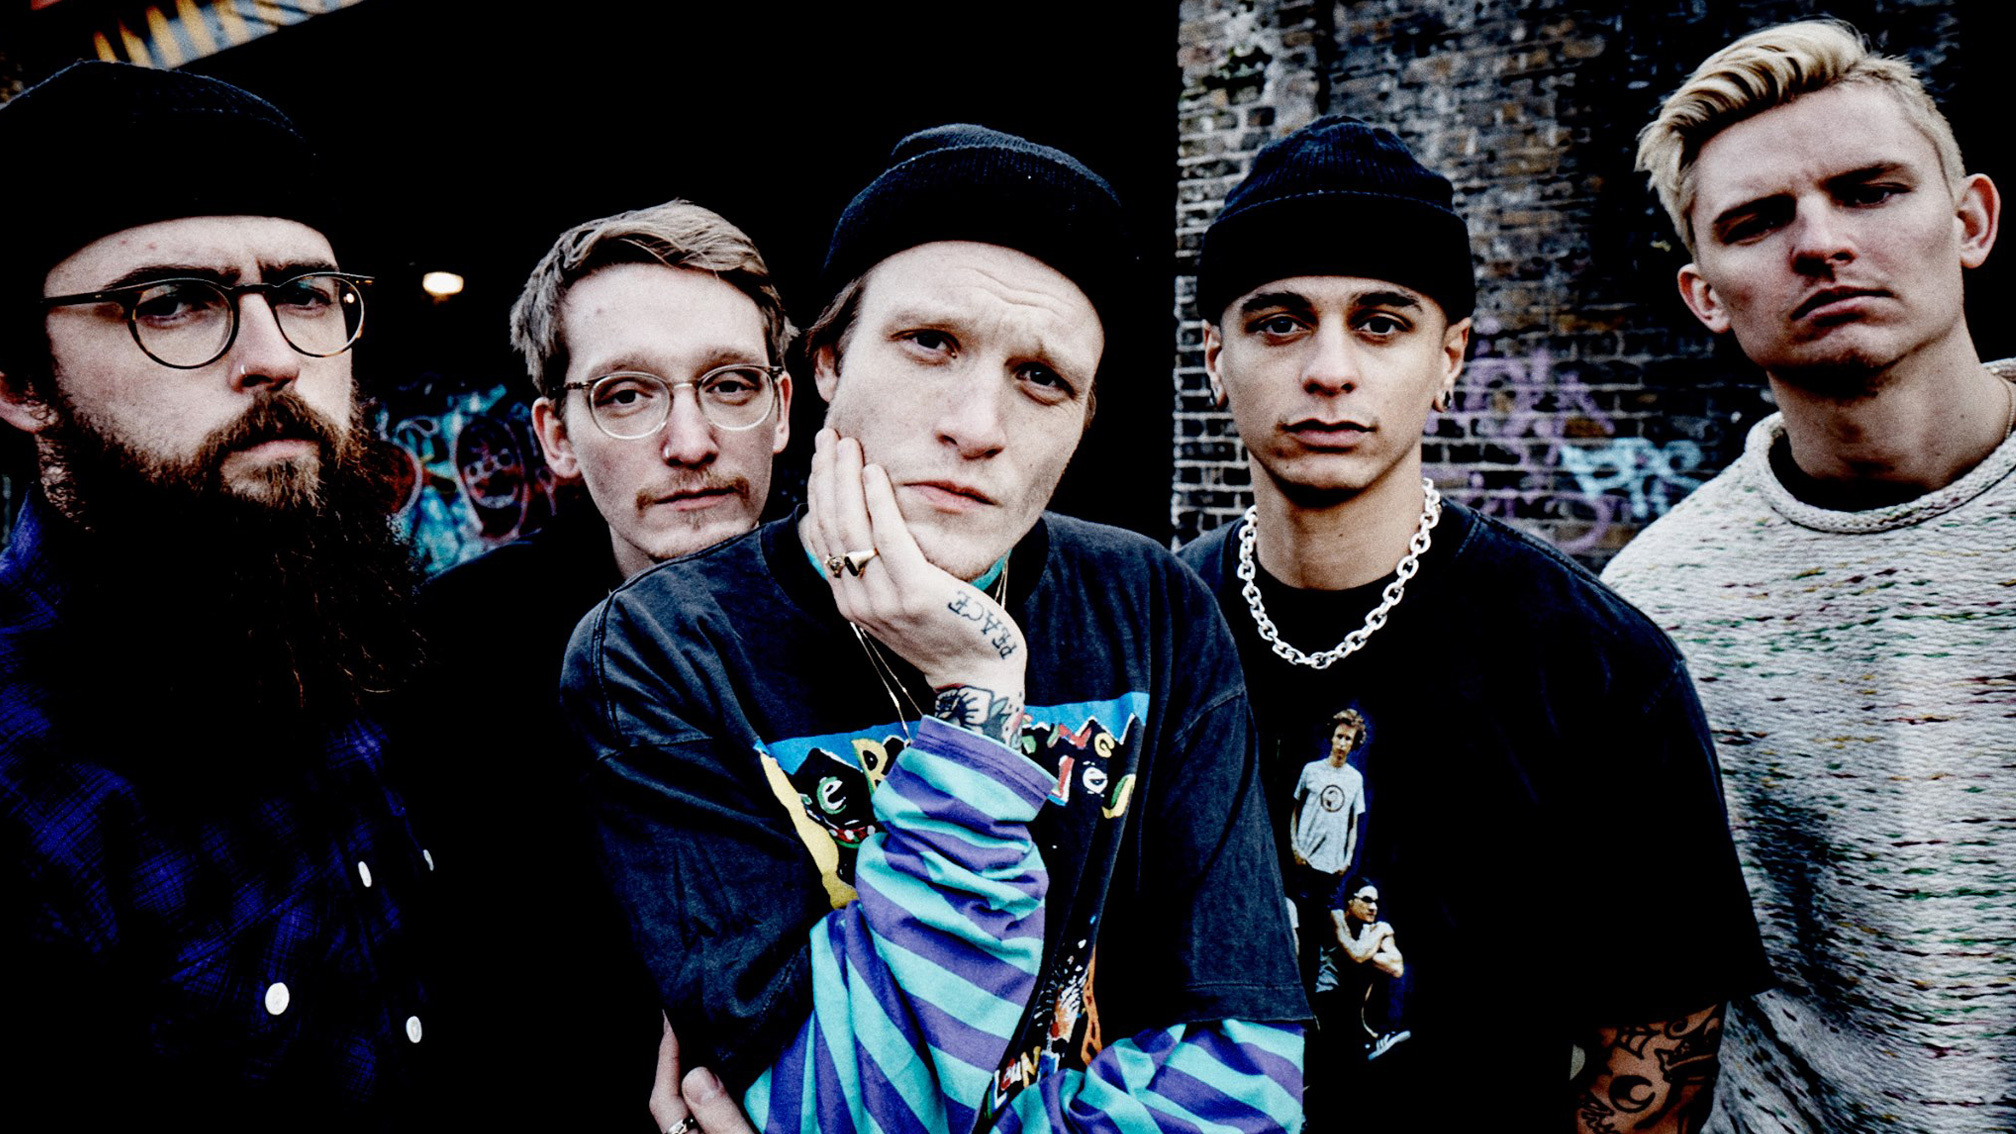 New Music Neck Deep "All Distortions Are Intentional" LP 